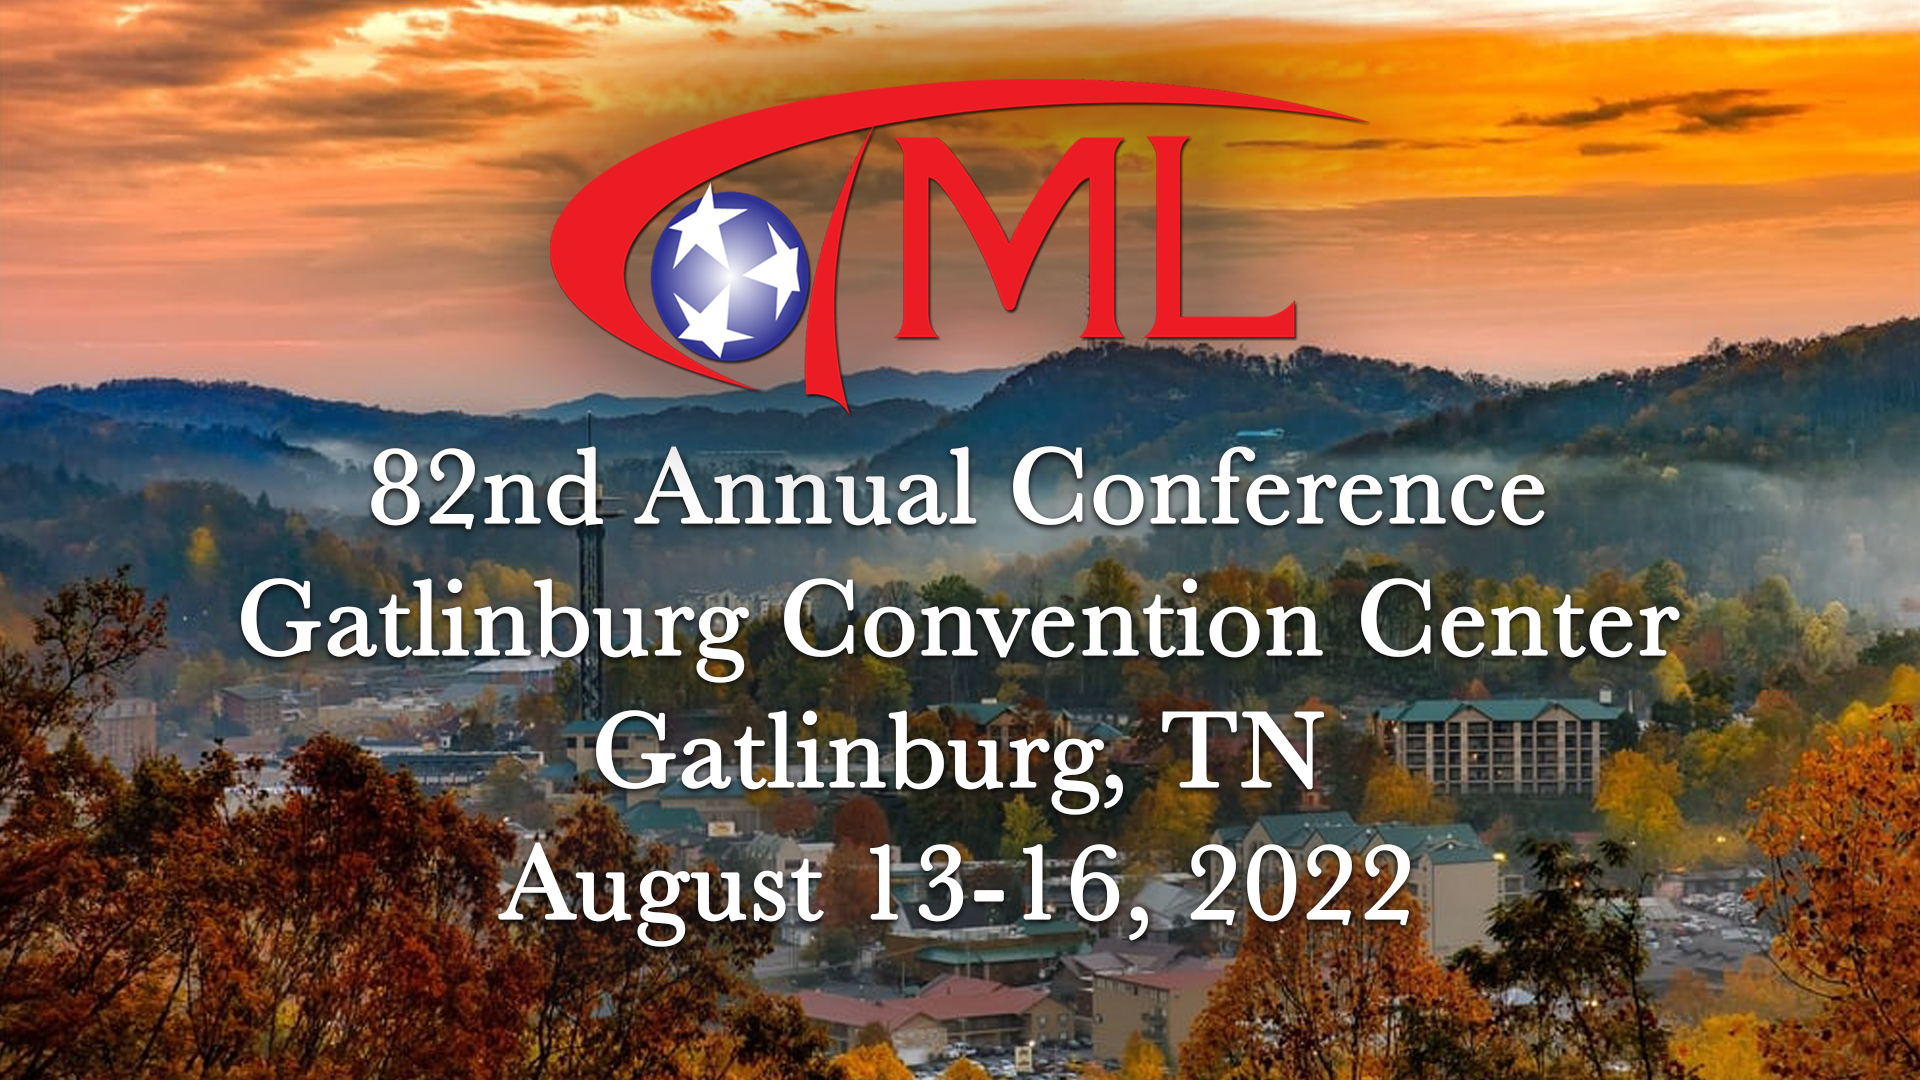 82nd Annual Conference: Registration Now Open